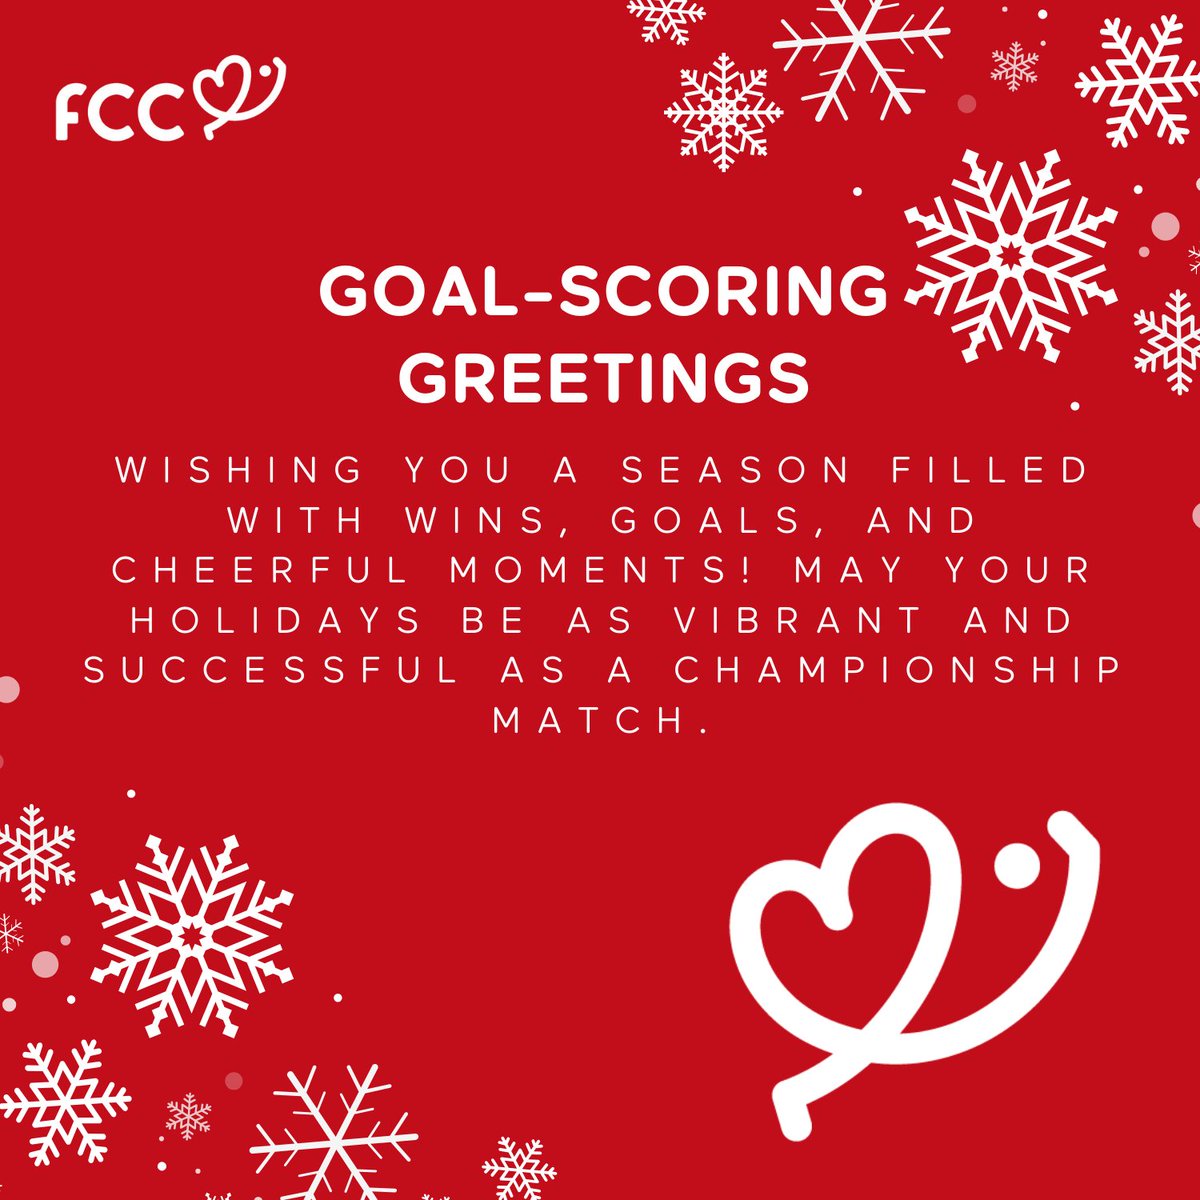 🌟 Wishing you a holiday season filled with wins, goals, and cheerful moments! May your holidays shine as bright as a championship match. From our FCC family to yours, Happy Holidays! ✨⚽ #HolidayCheers #FCCFamily